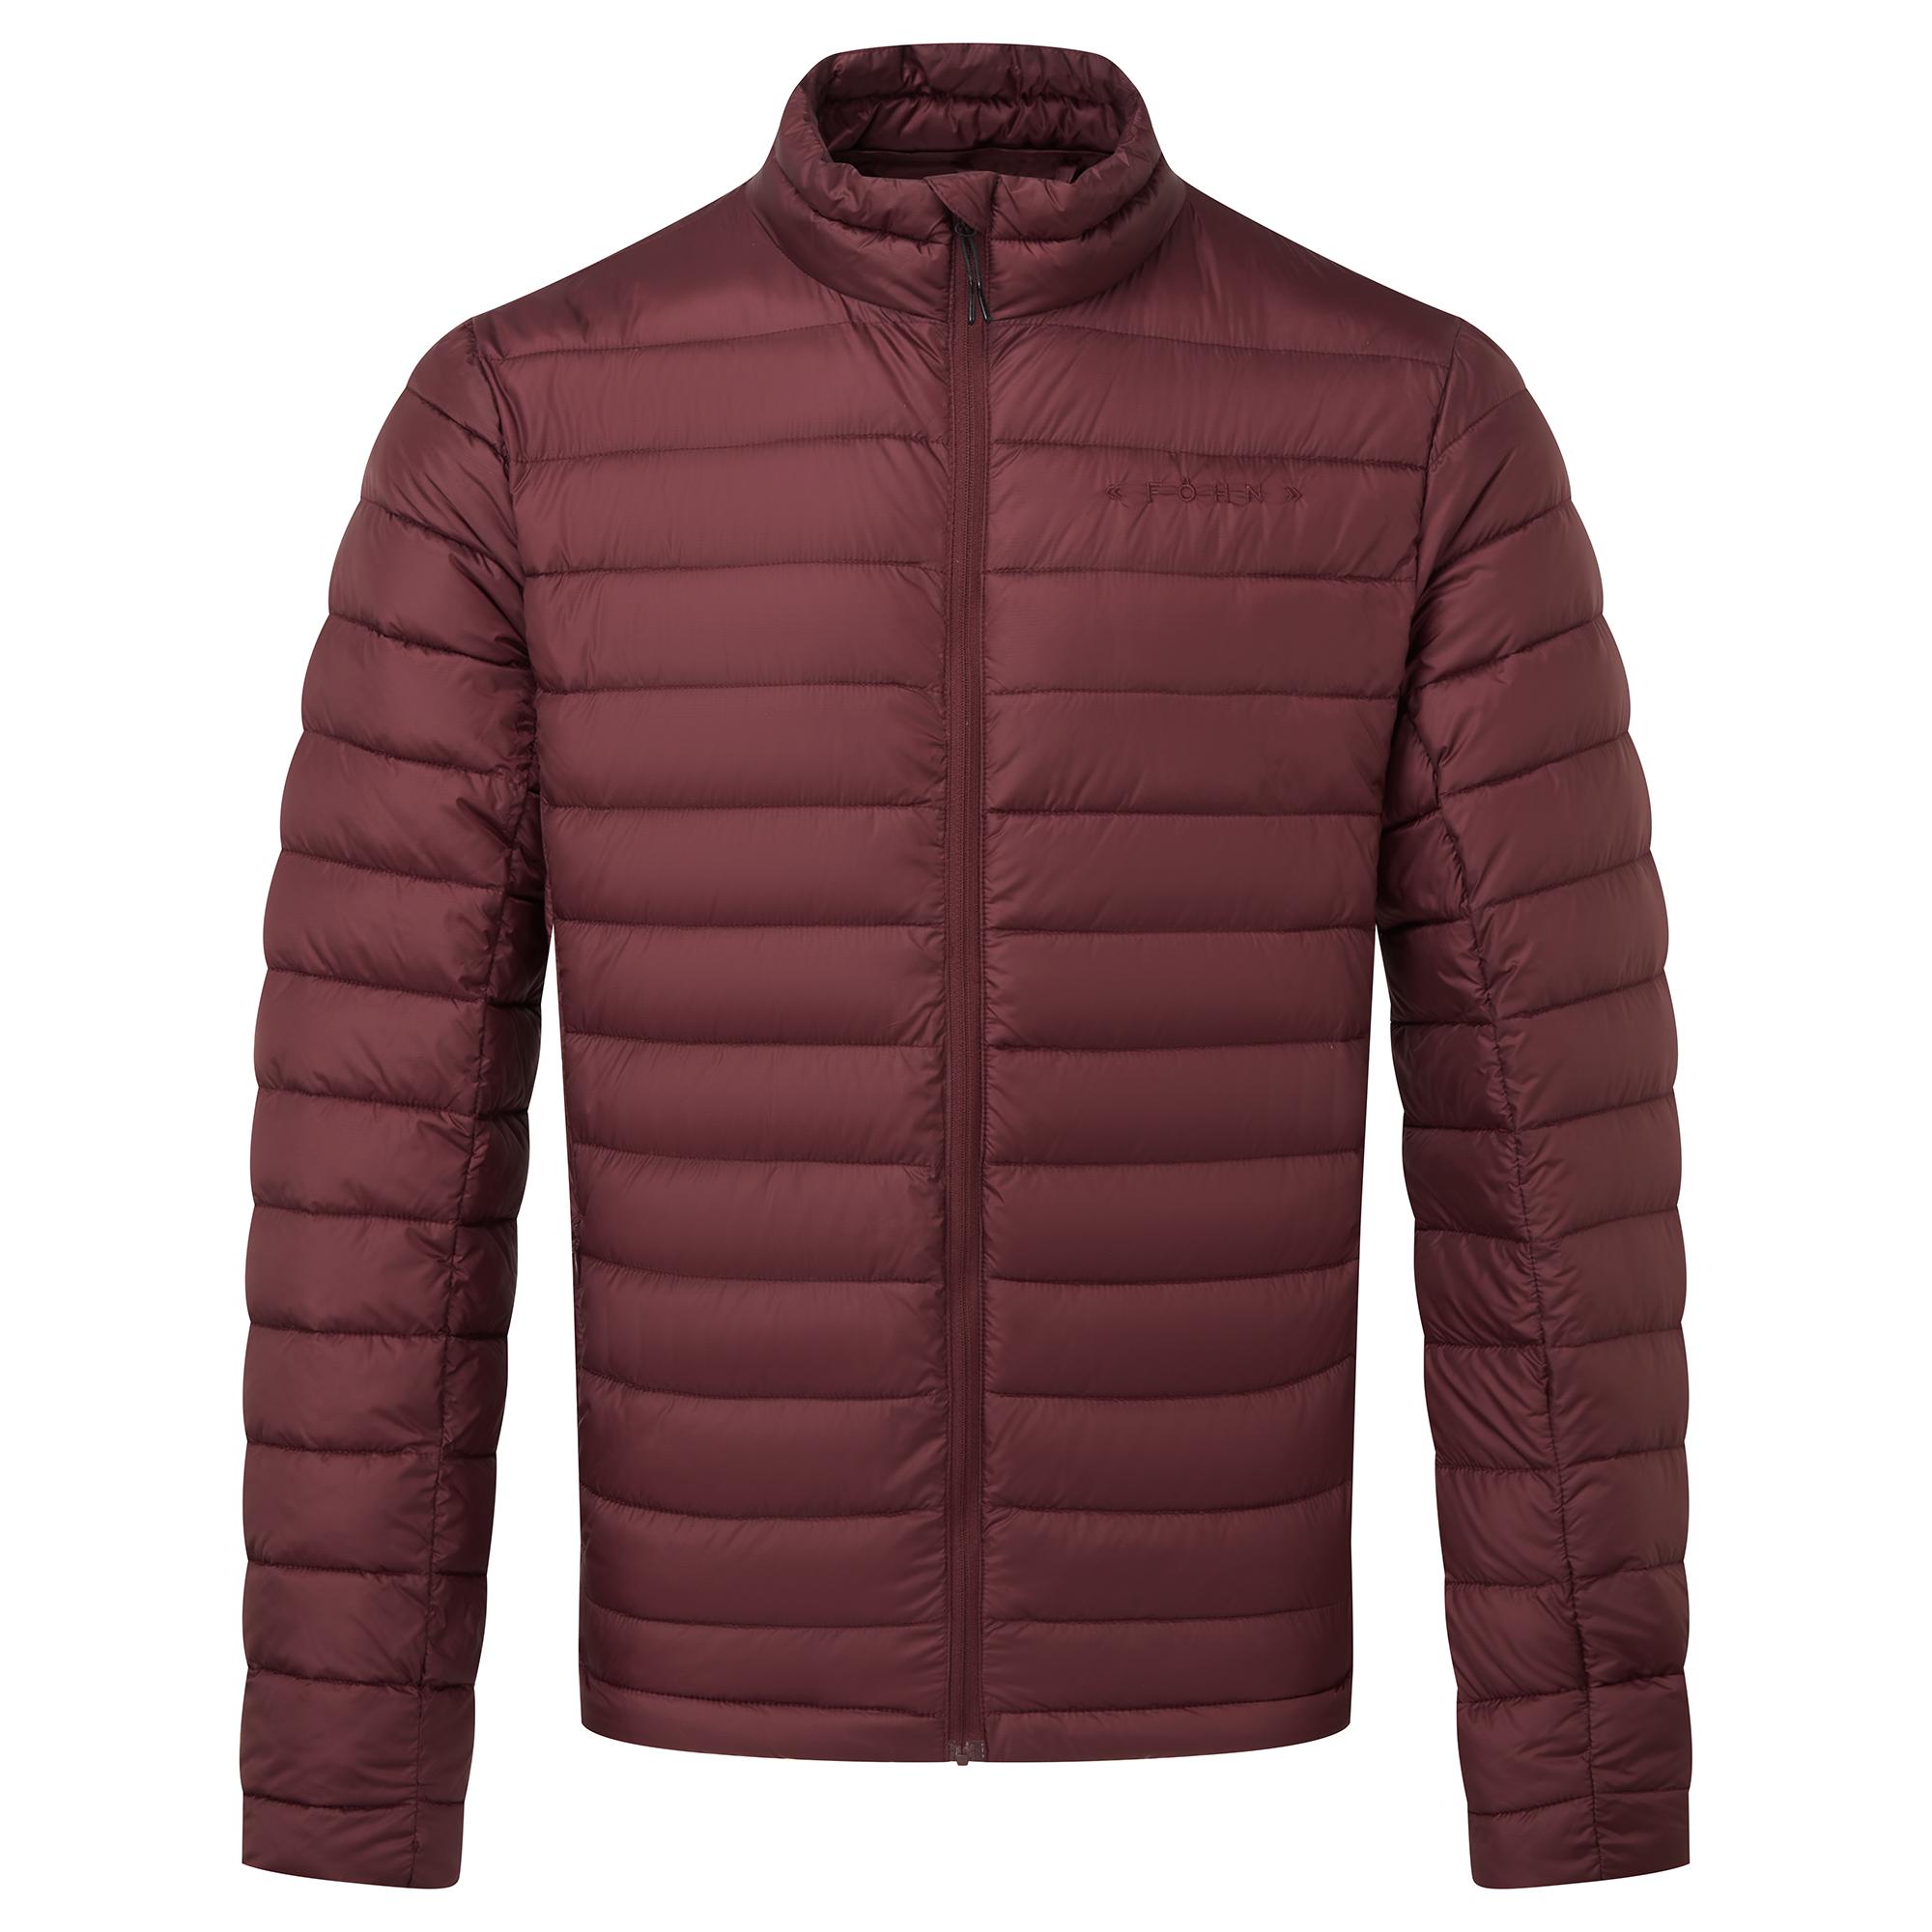 Fhn Mens Micro Synthetic Down Jacket - Port Royale